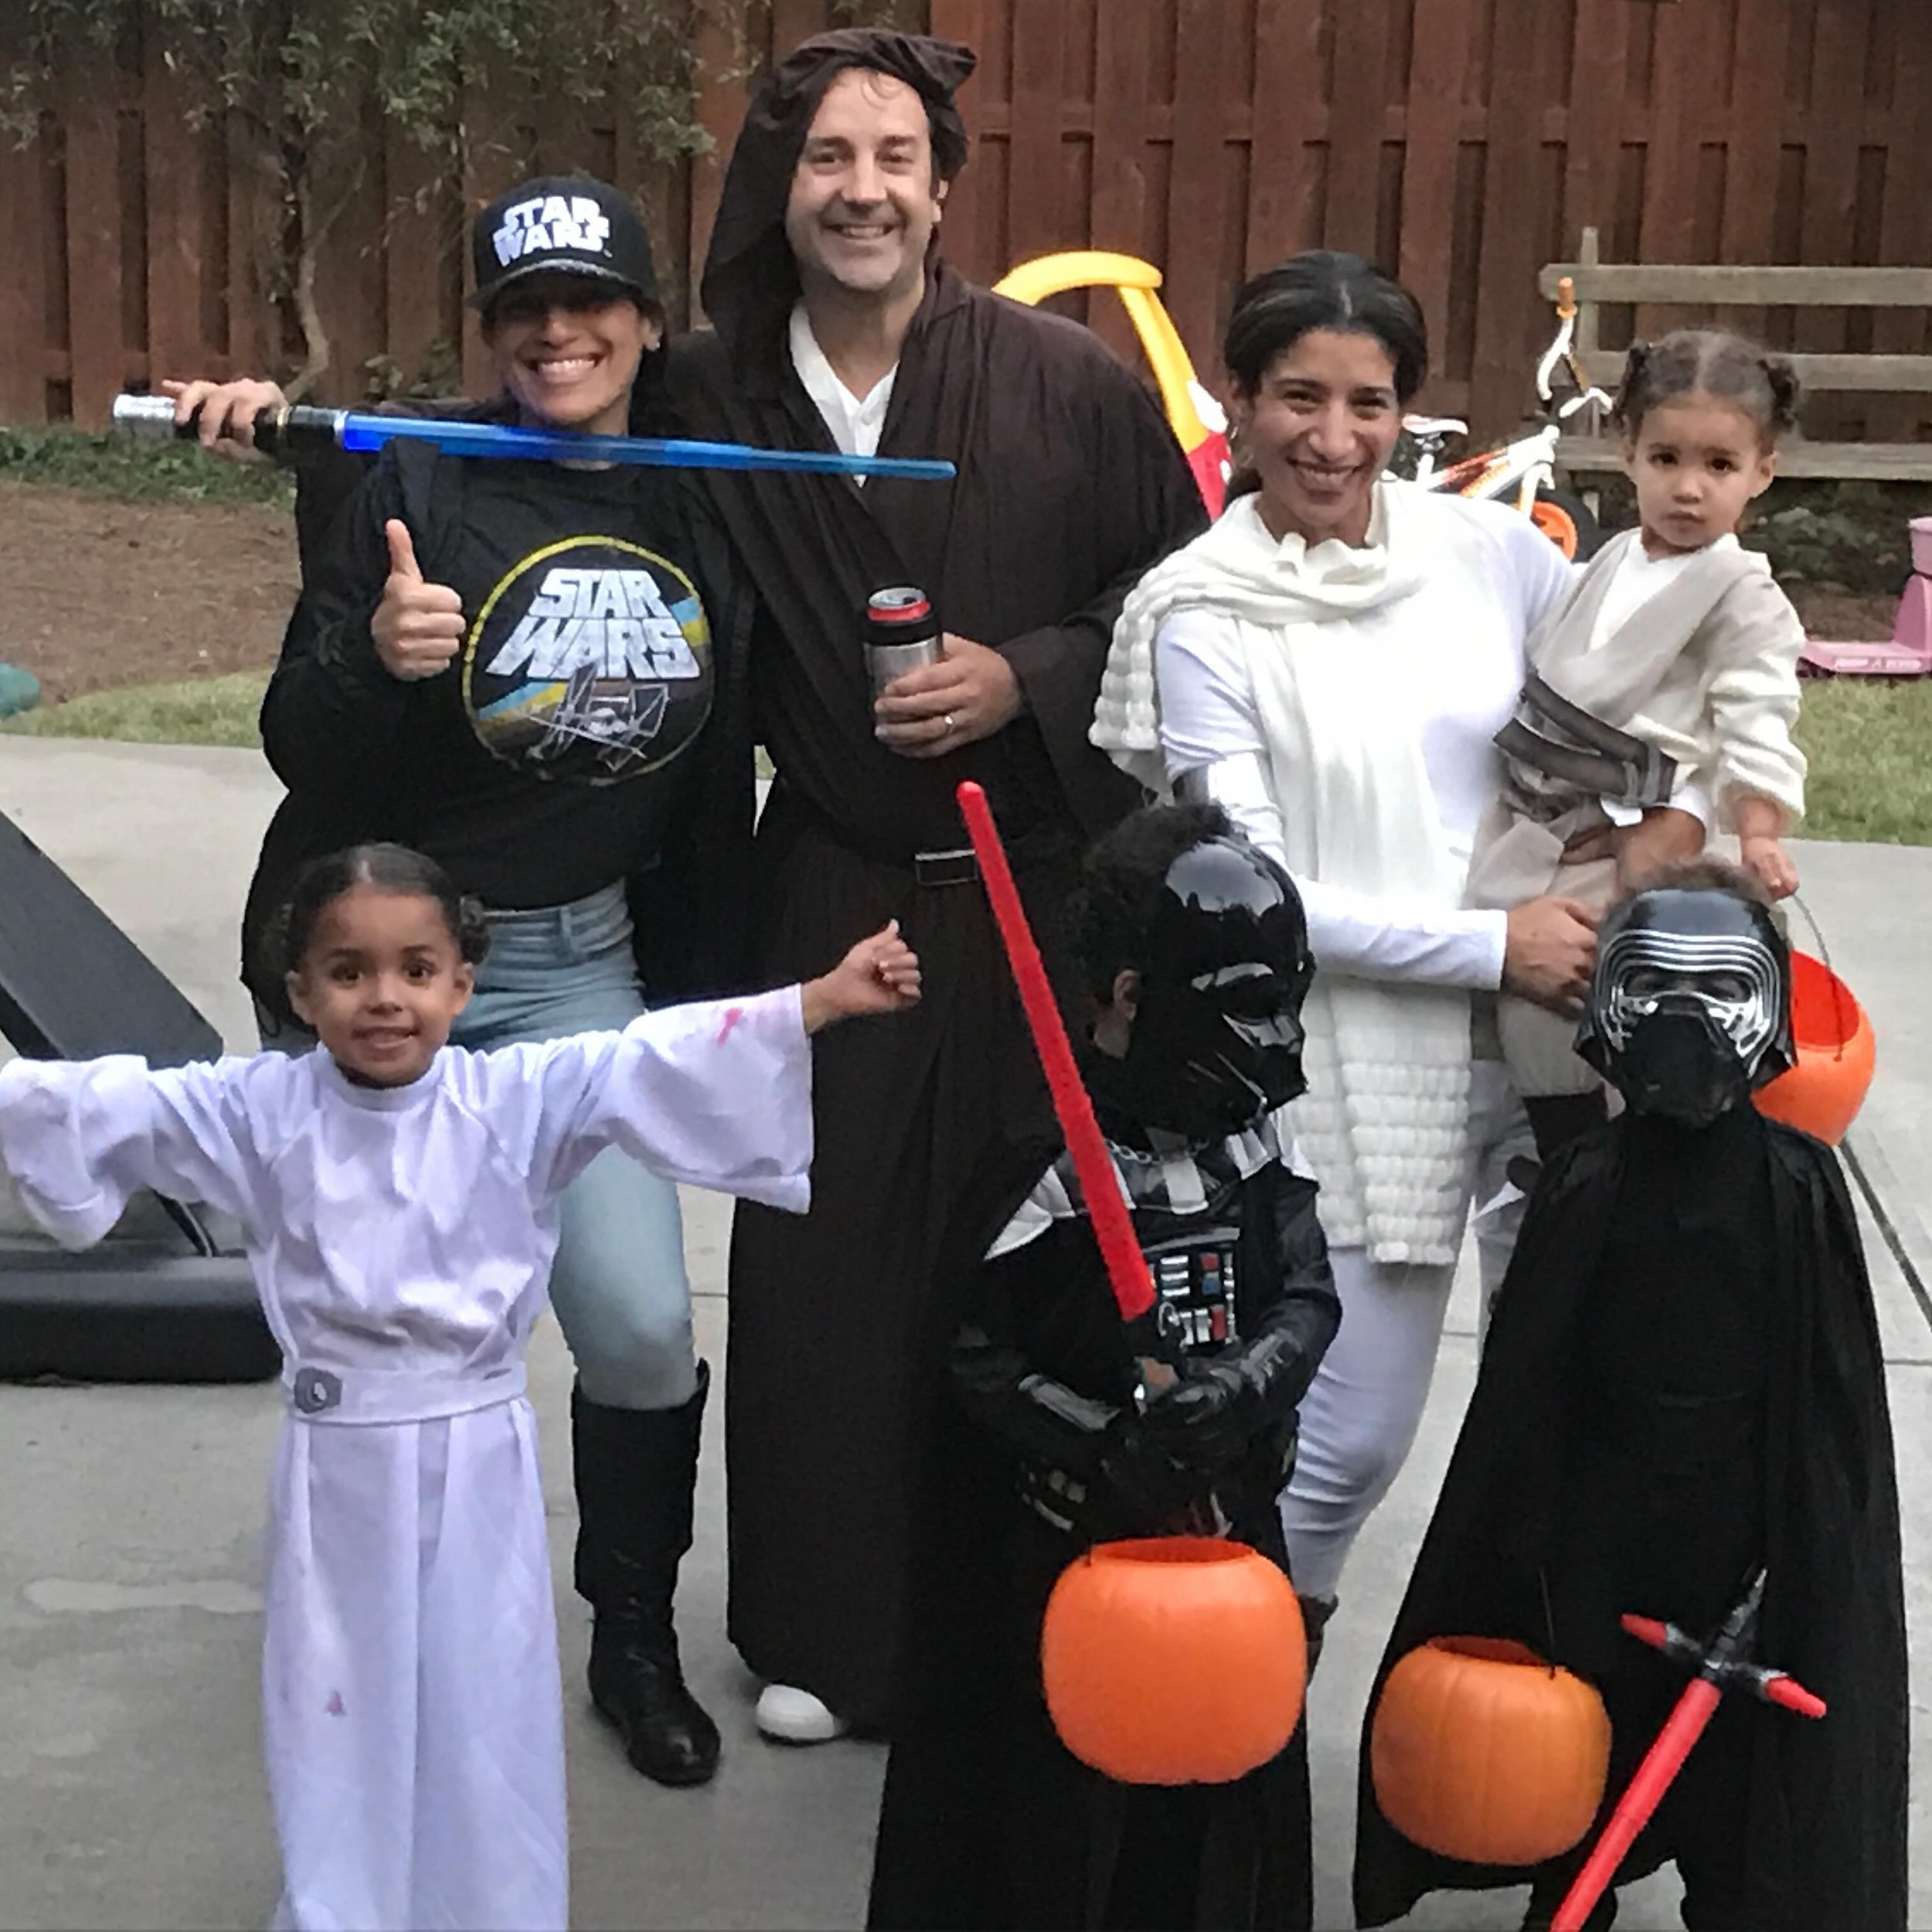 May the Fourth be with you! Throwback to my peak Halloween family costume achievement. 😅 Here I was newly pregnant with Margot. The kids have since asserted their own personal costume aspirations&mdash; but maybe down the line they&rsquo;ll humor me